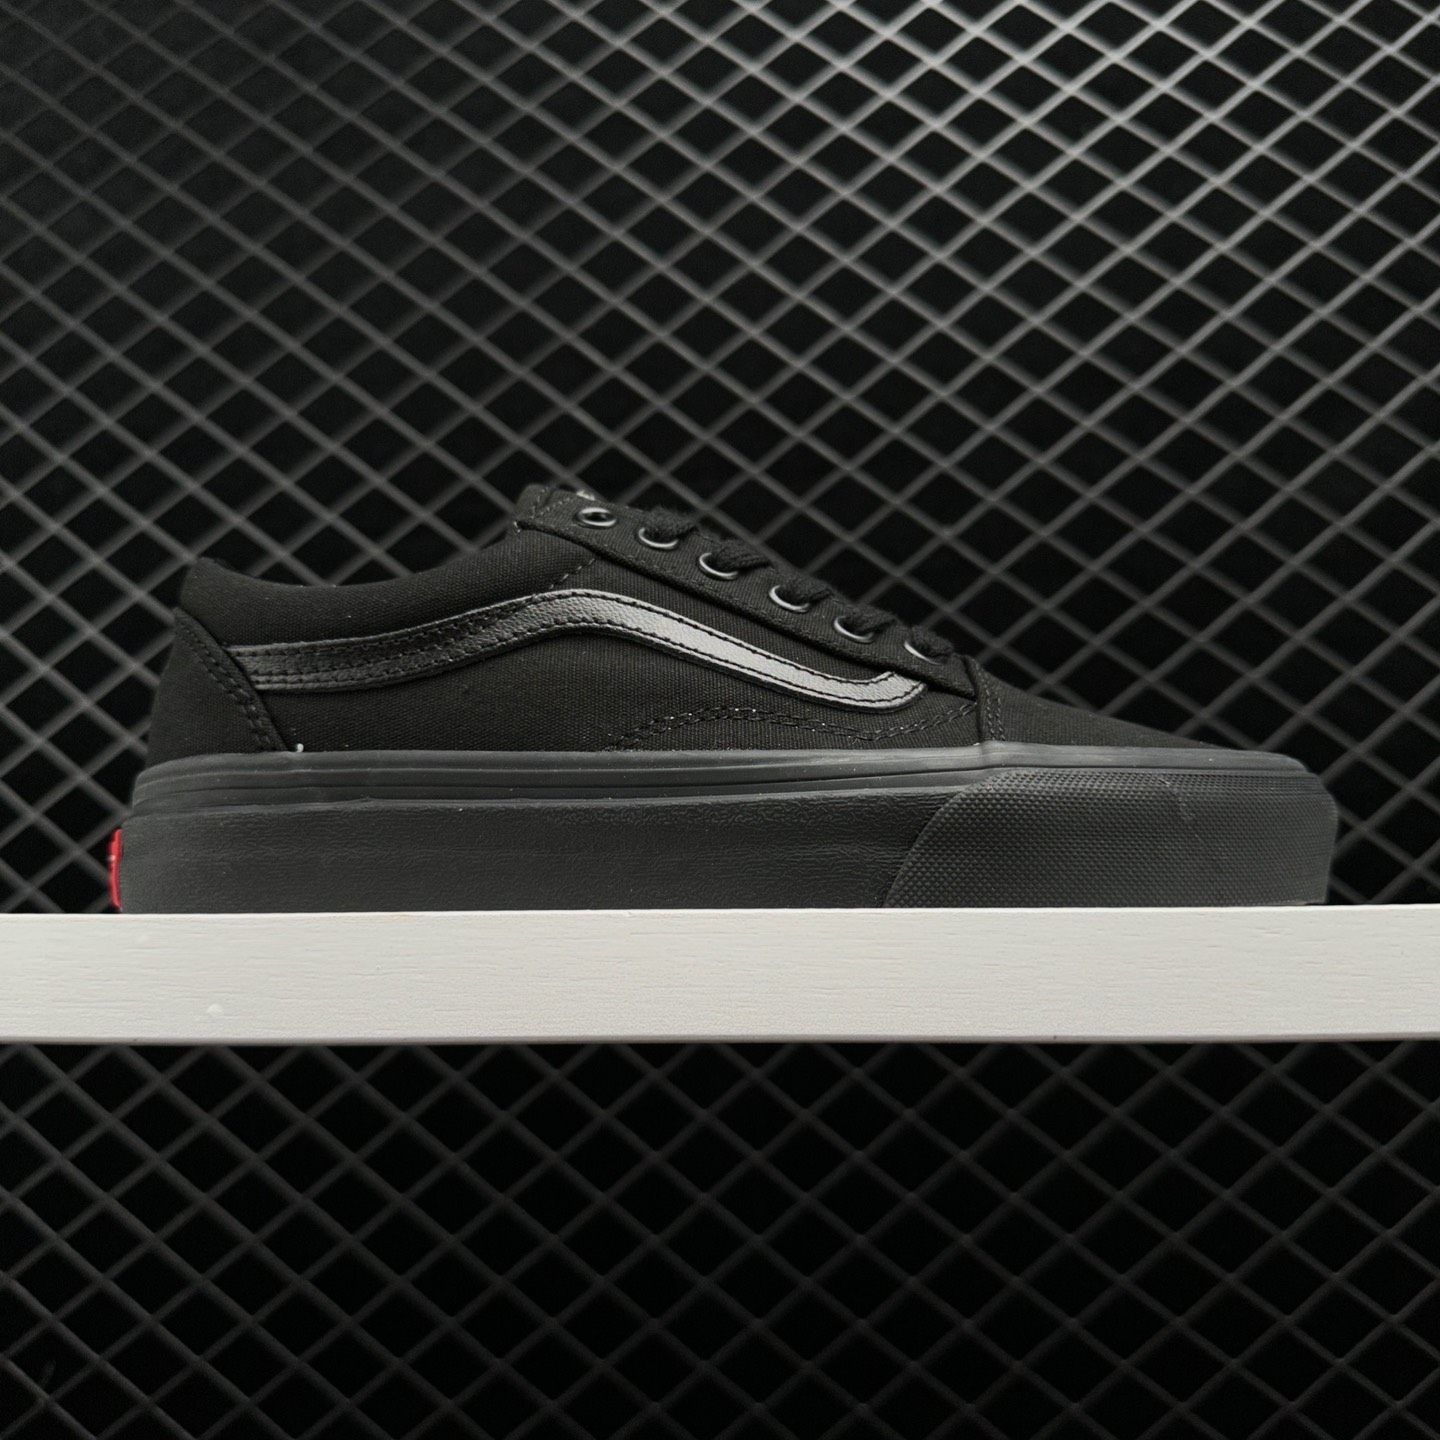 Vans Old Skool 'Black' - Classic Style for Everyday Fashion